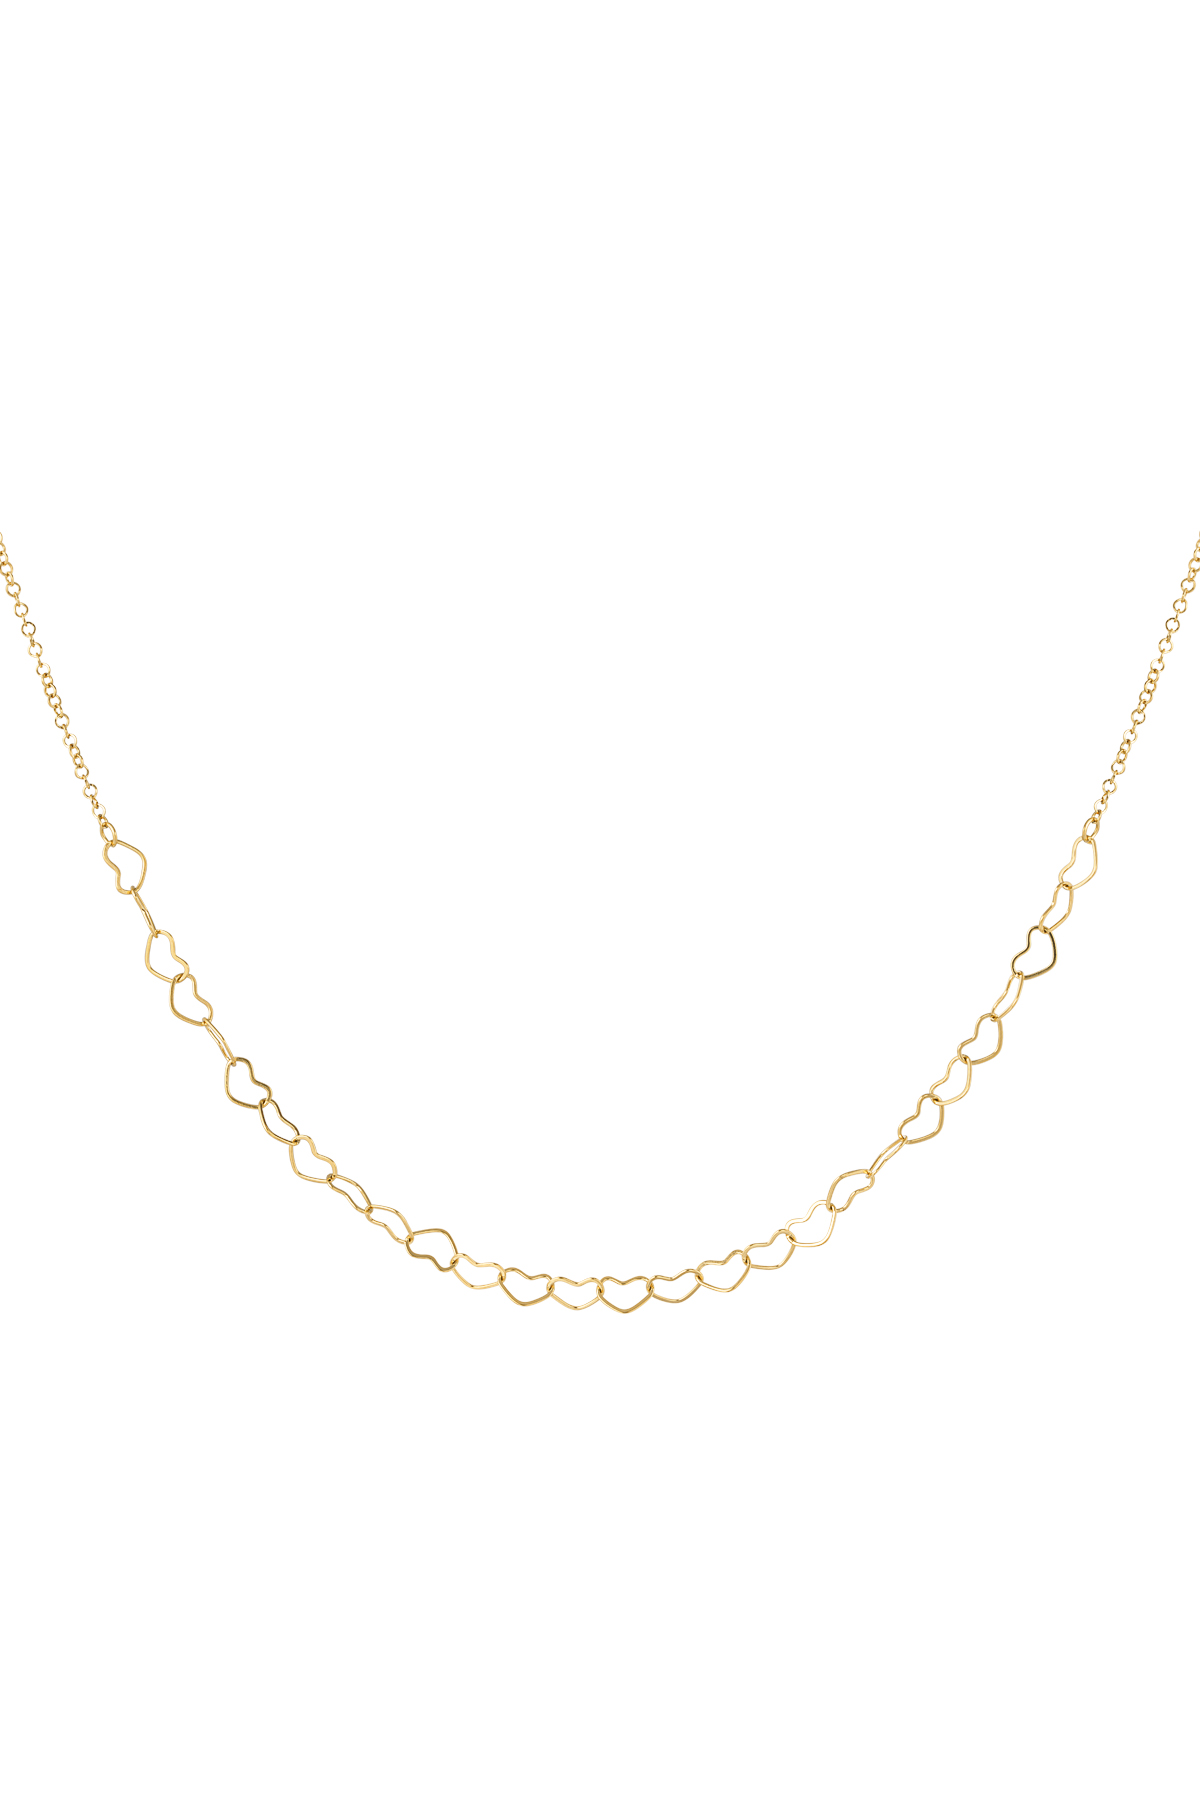 Necklace linked hearts - gold h5 